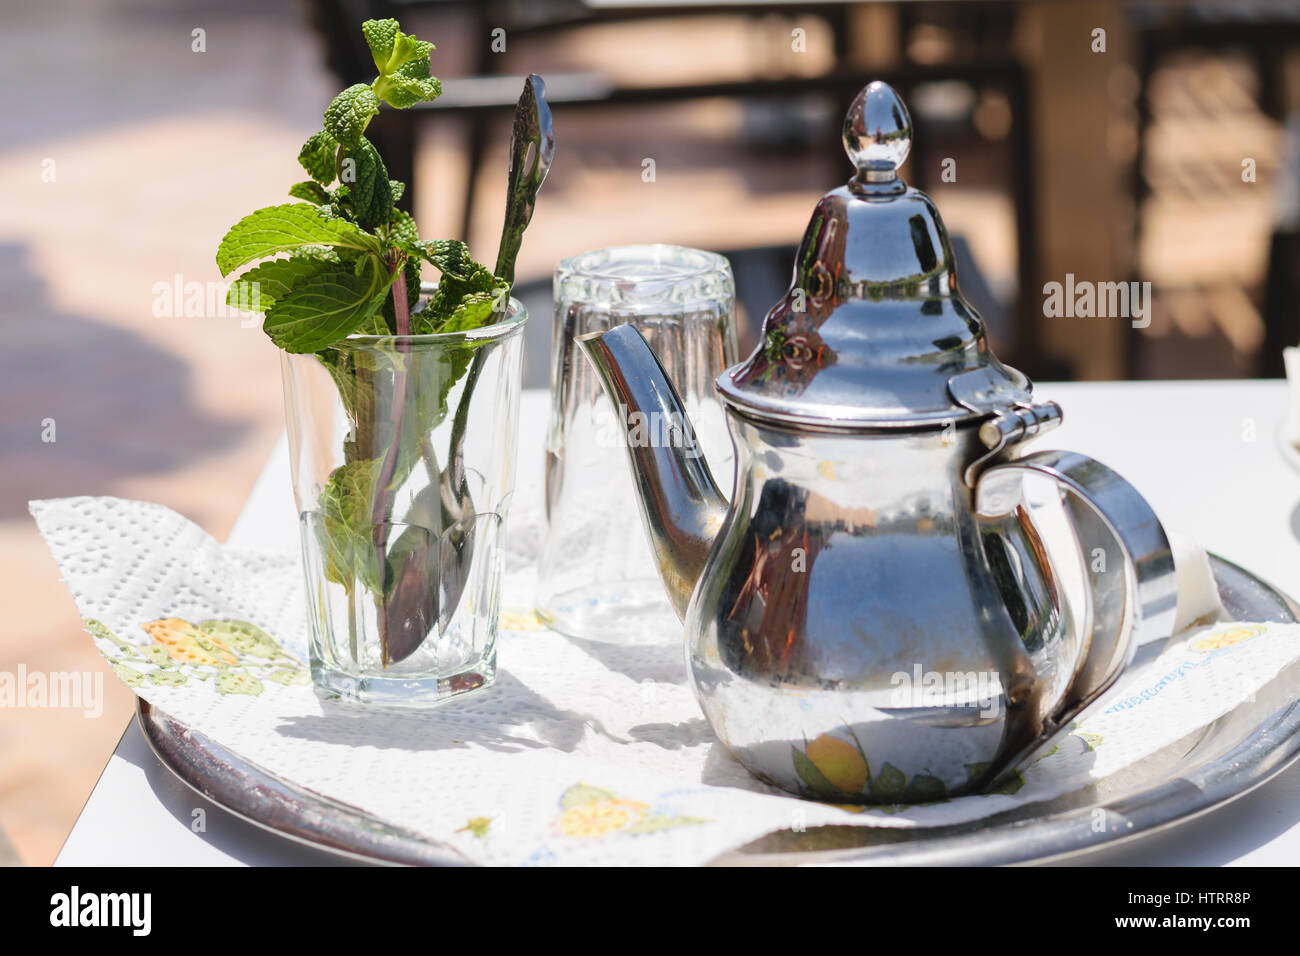 Image of a teapot and a glass with mint leaves to prepare a mint tea Moroccan style. Stock Photo